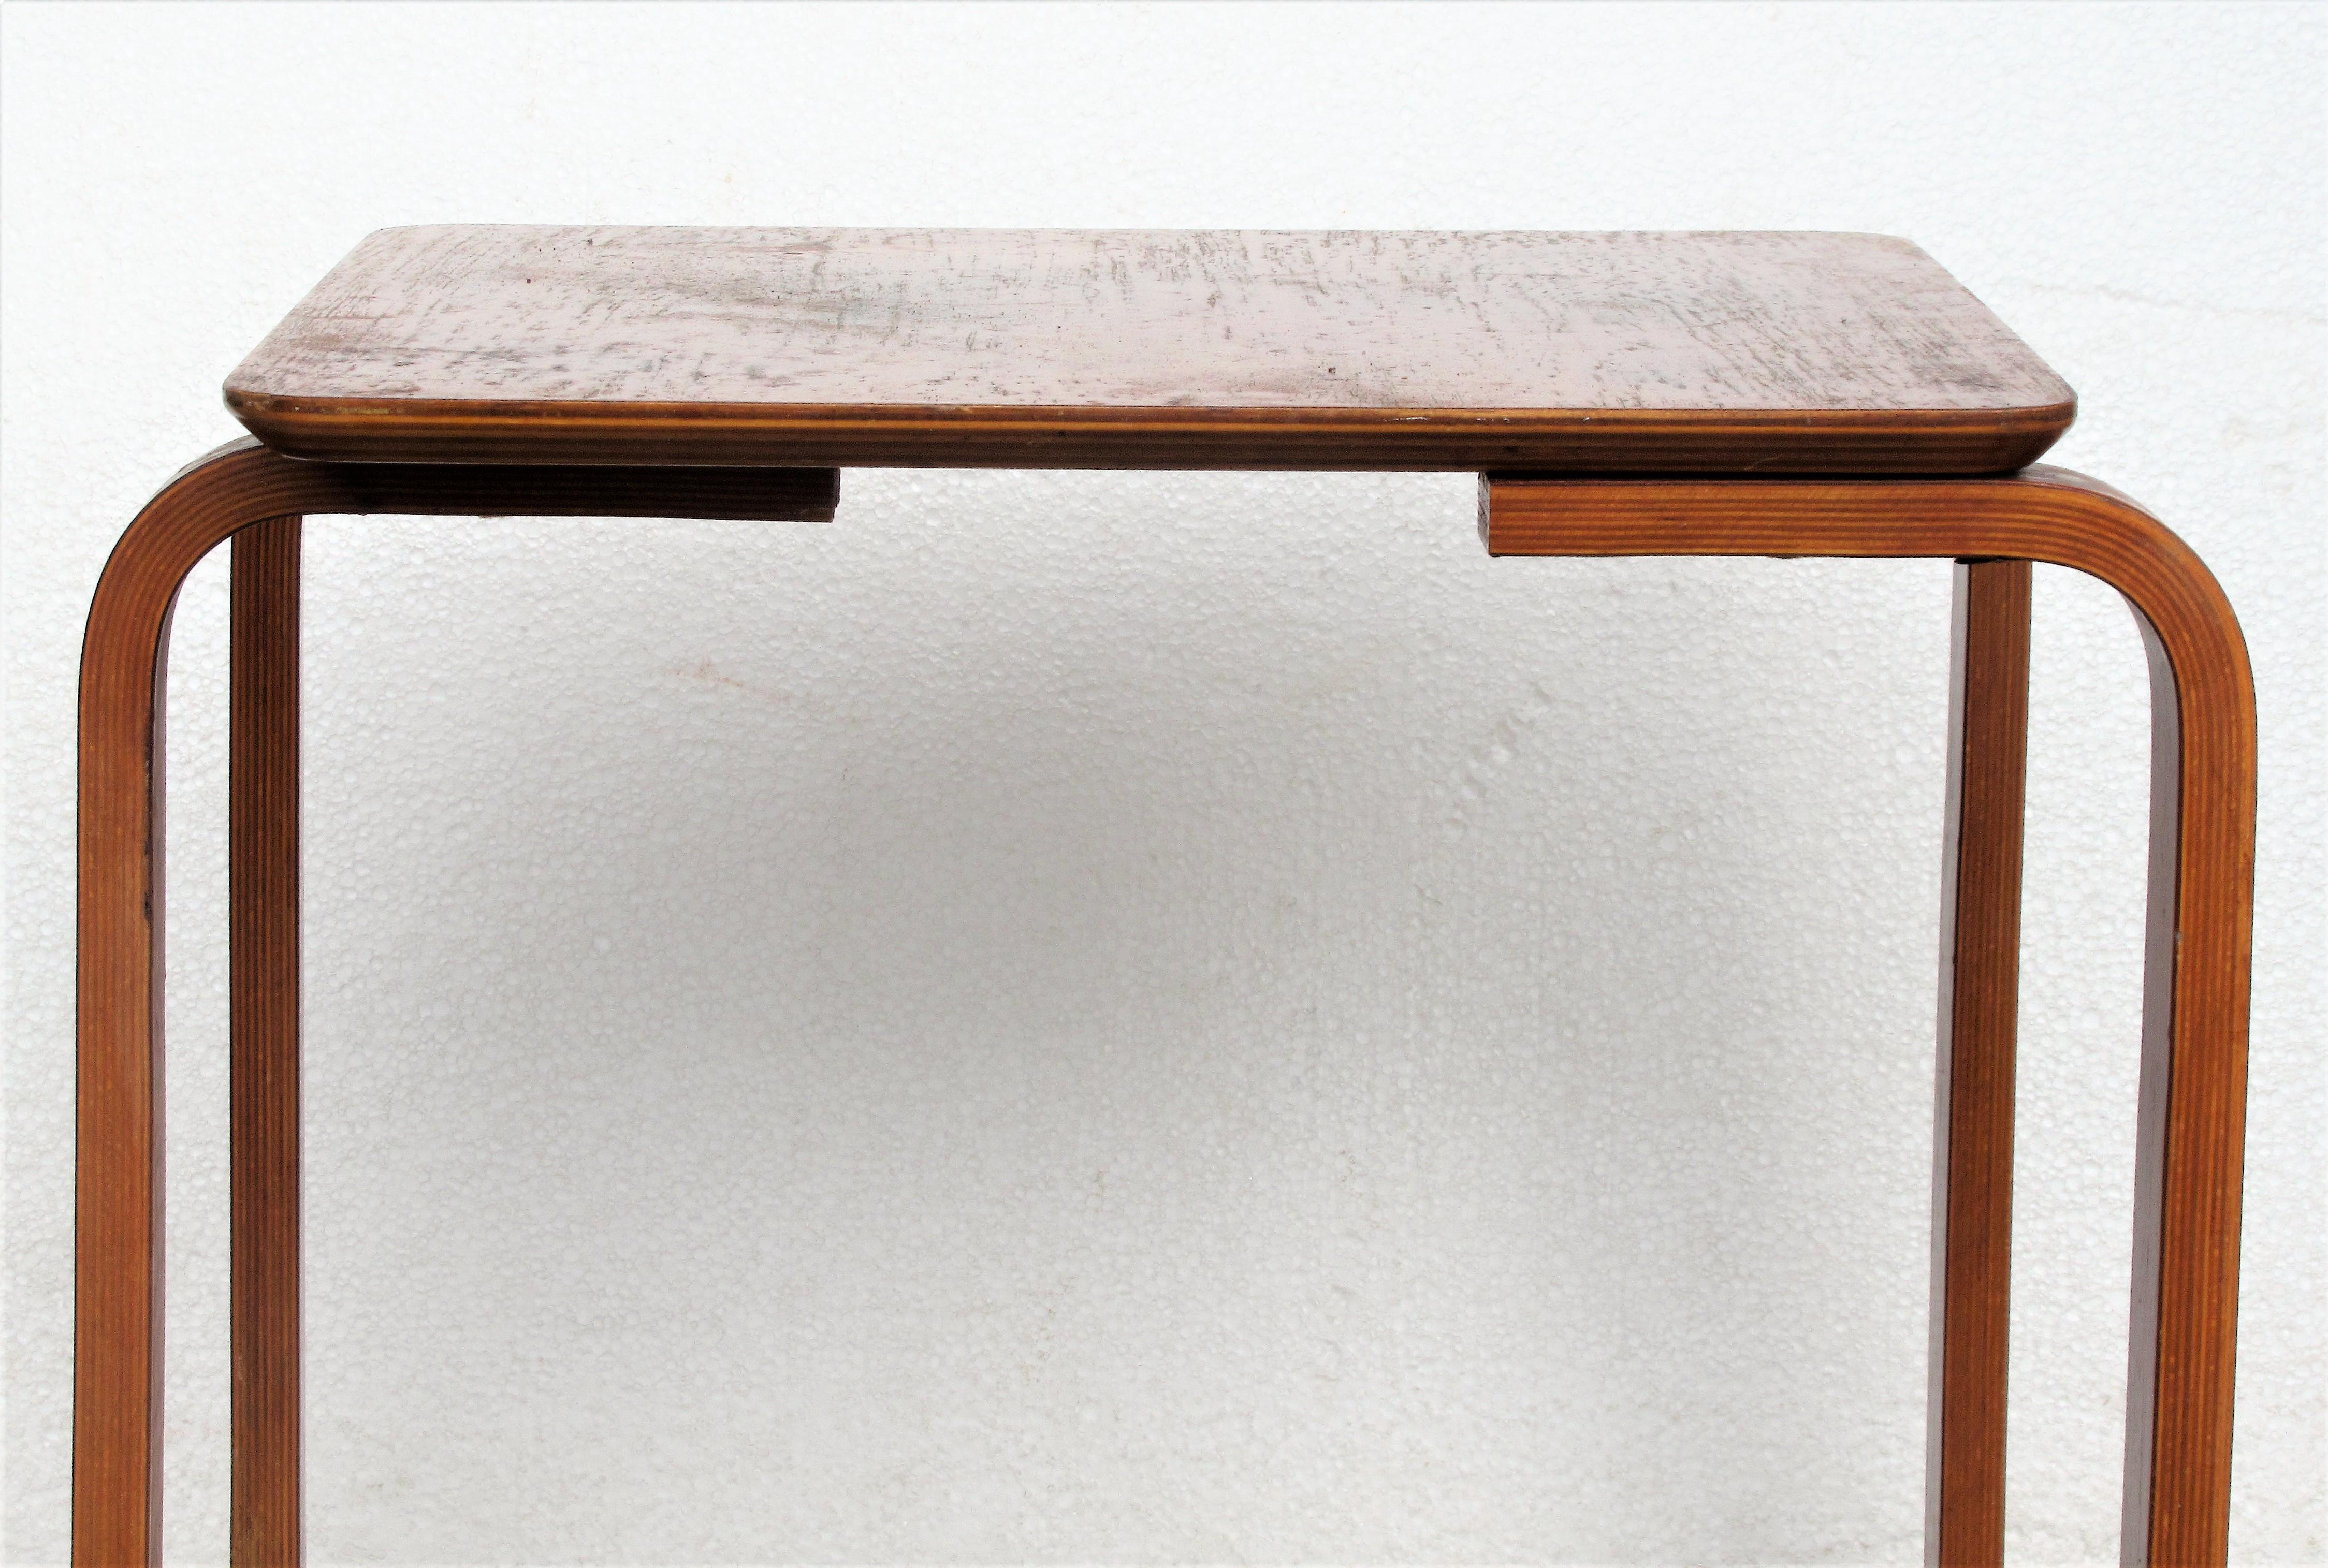 Scandinavian Modern Bent Plywood and Teak Occasional Side Table - Made in Denmark - 1950